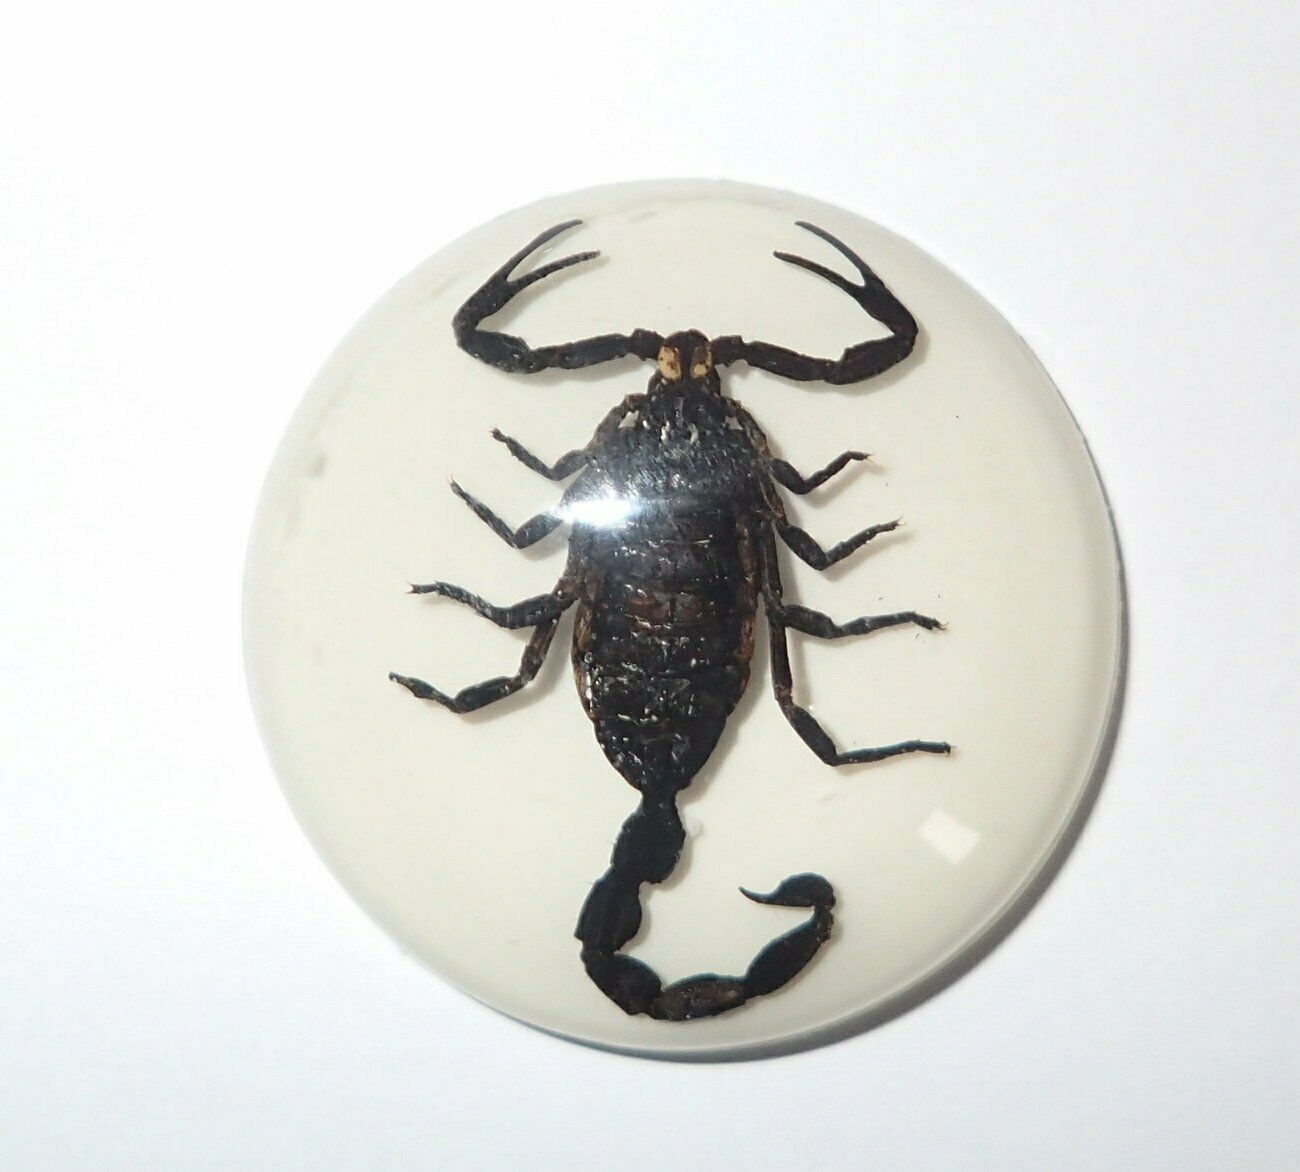 Insect Cabochon Black Scorpion 35 Mm Round On White Bottom 1 Piece Lot